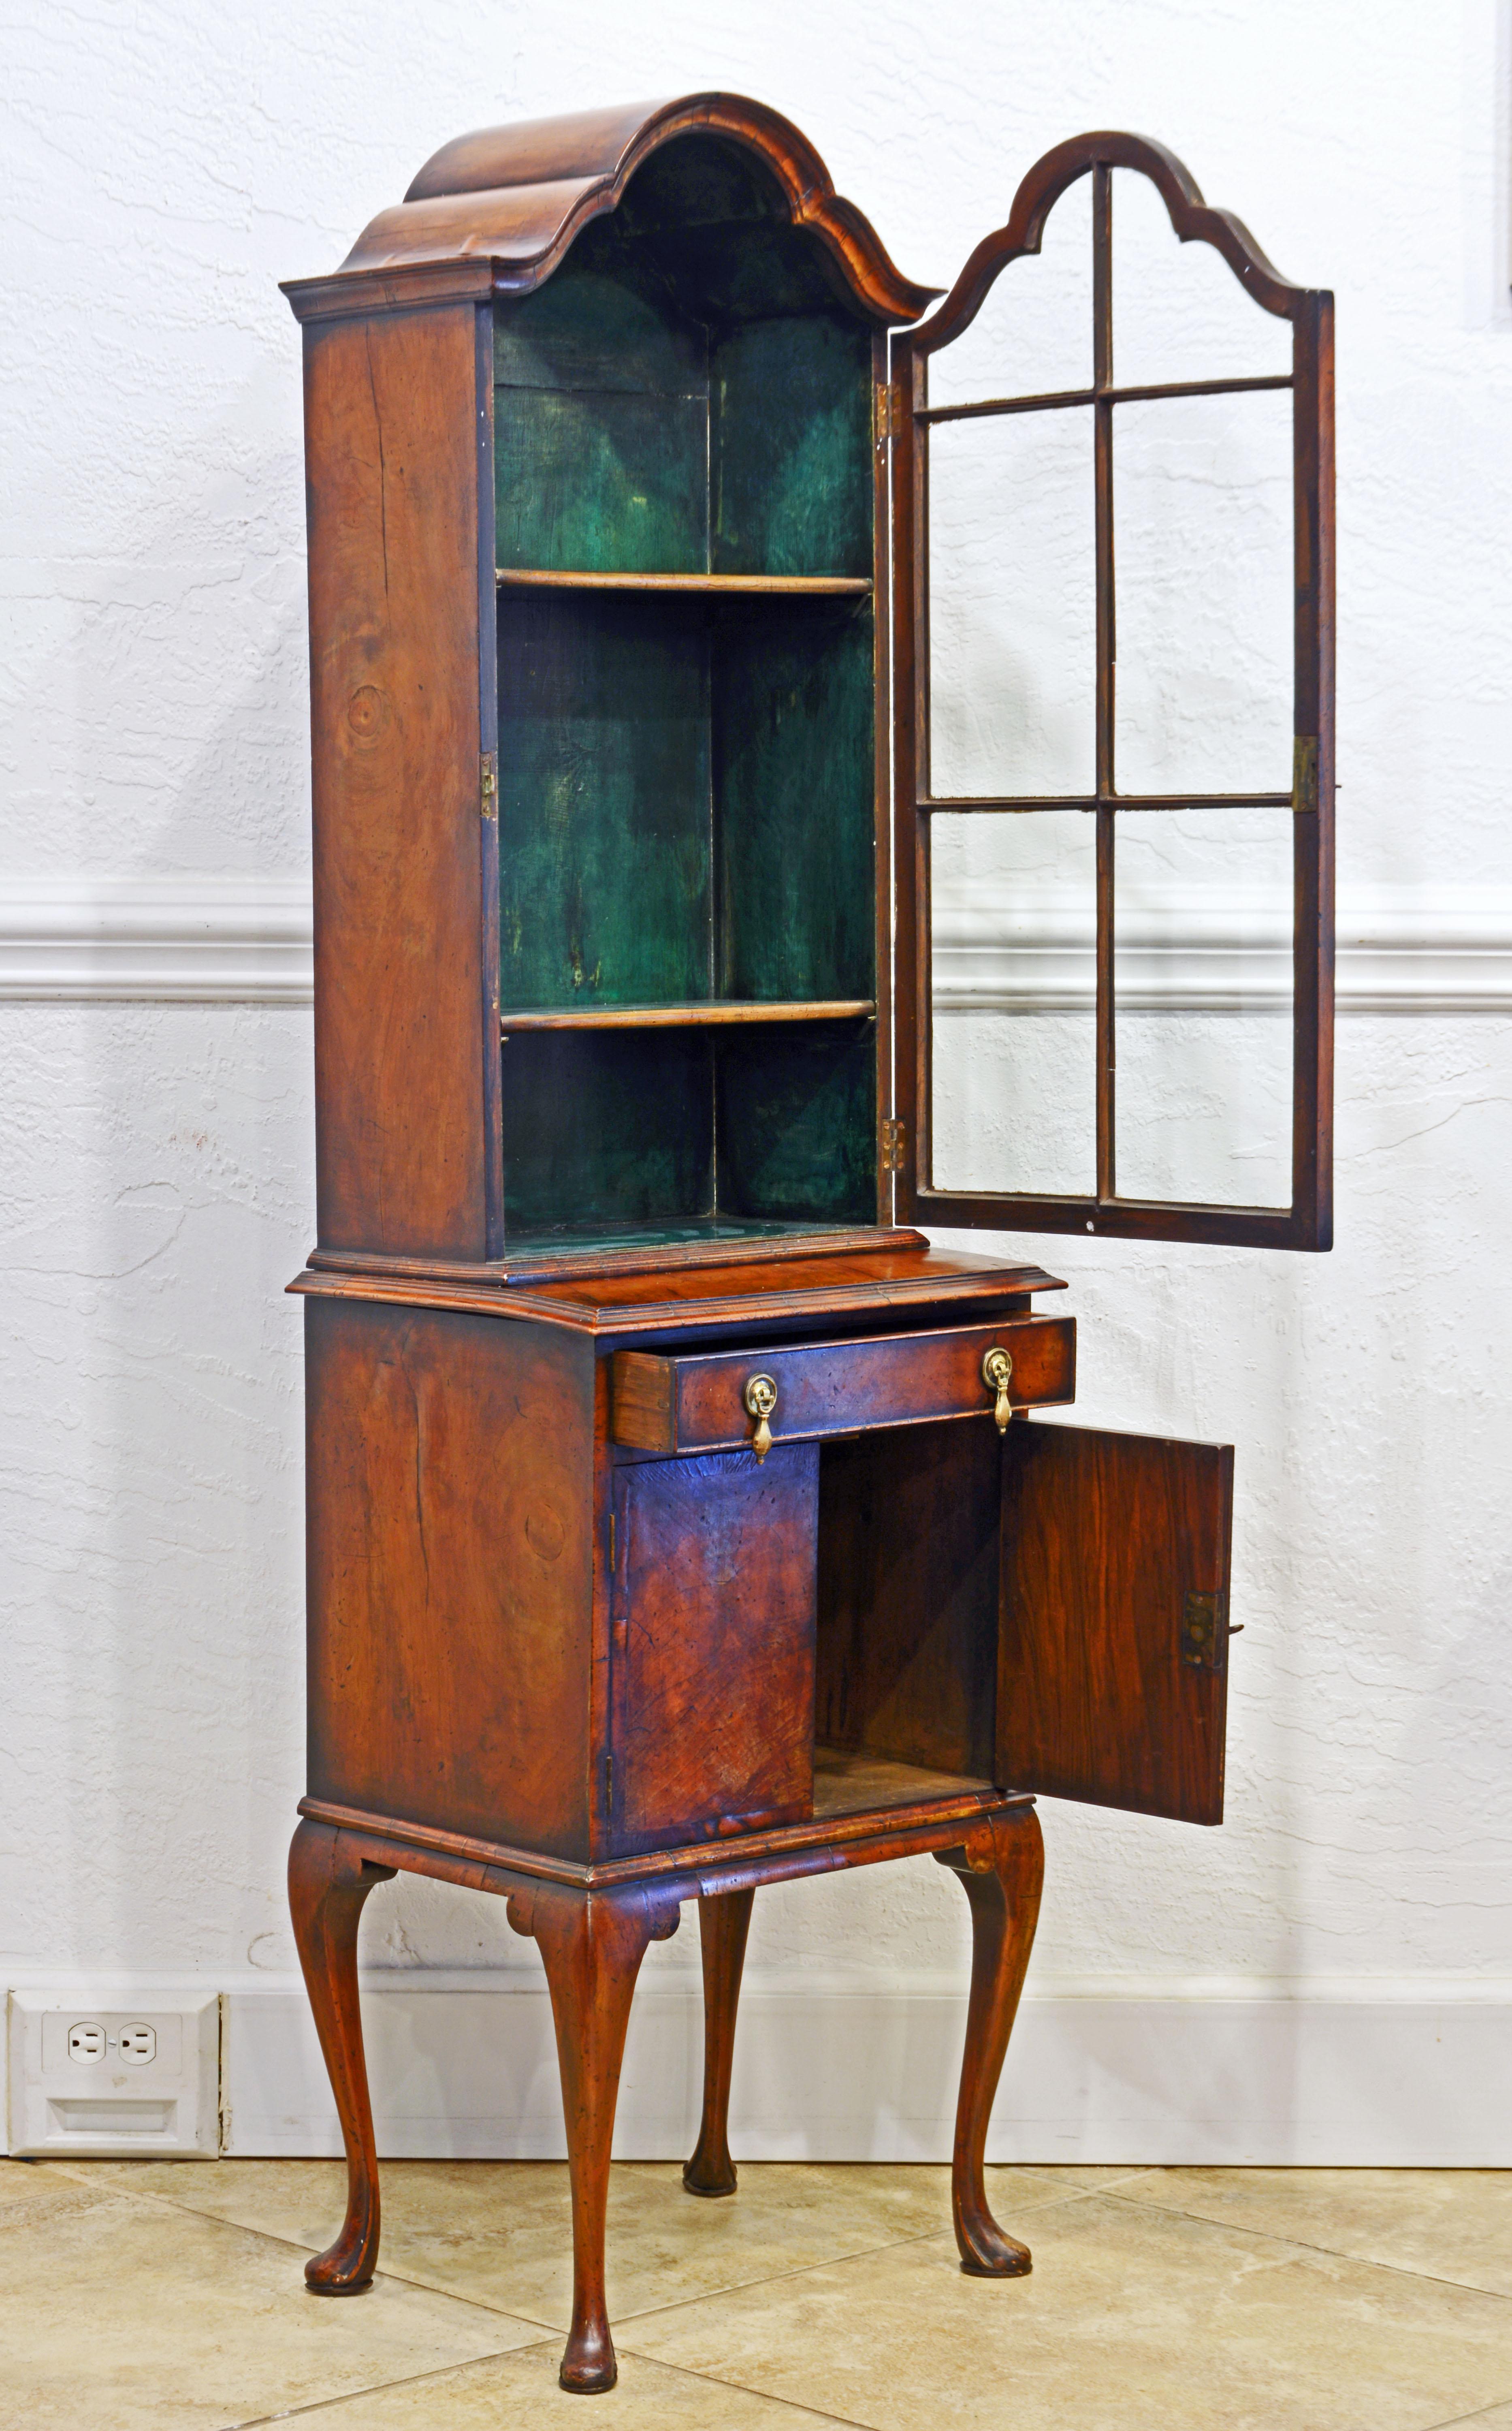 Brass Petite English Queen Anne Style Burled Walnut Display/Curio Cabinet, Late 19th C